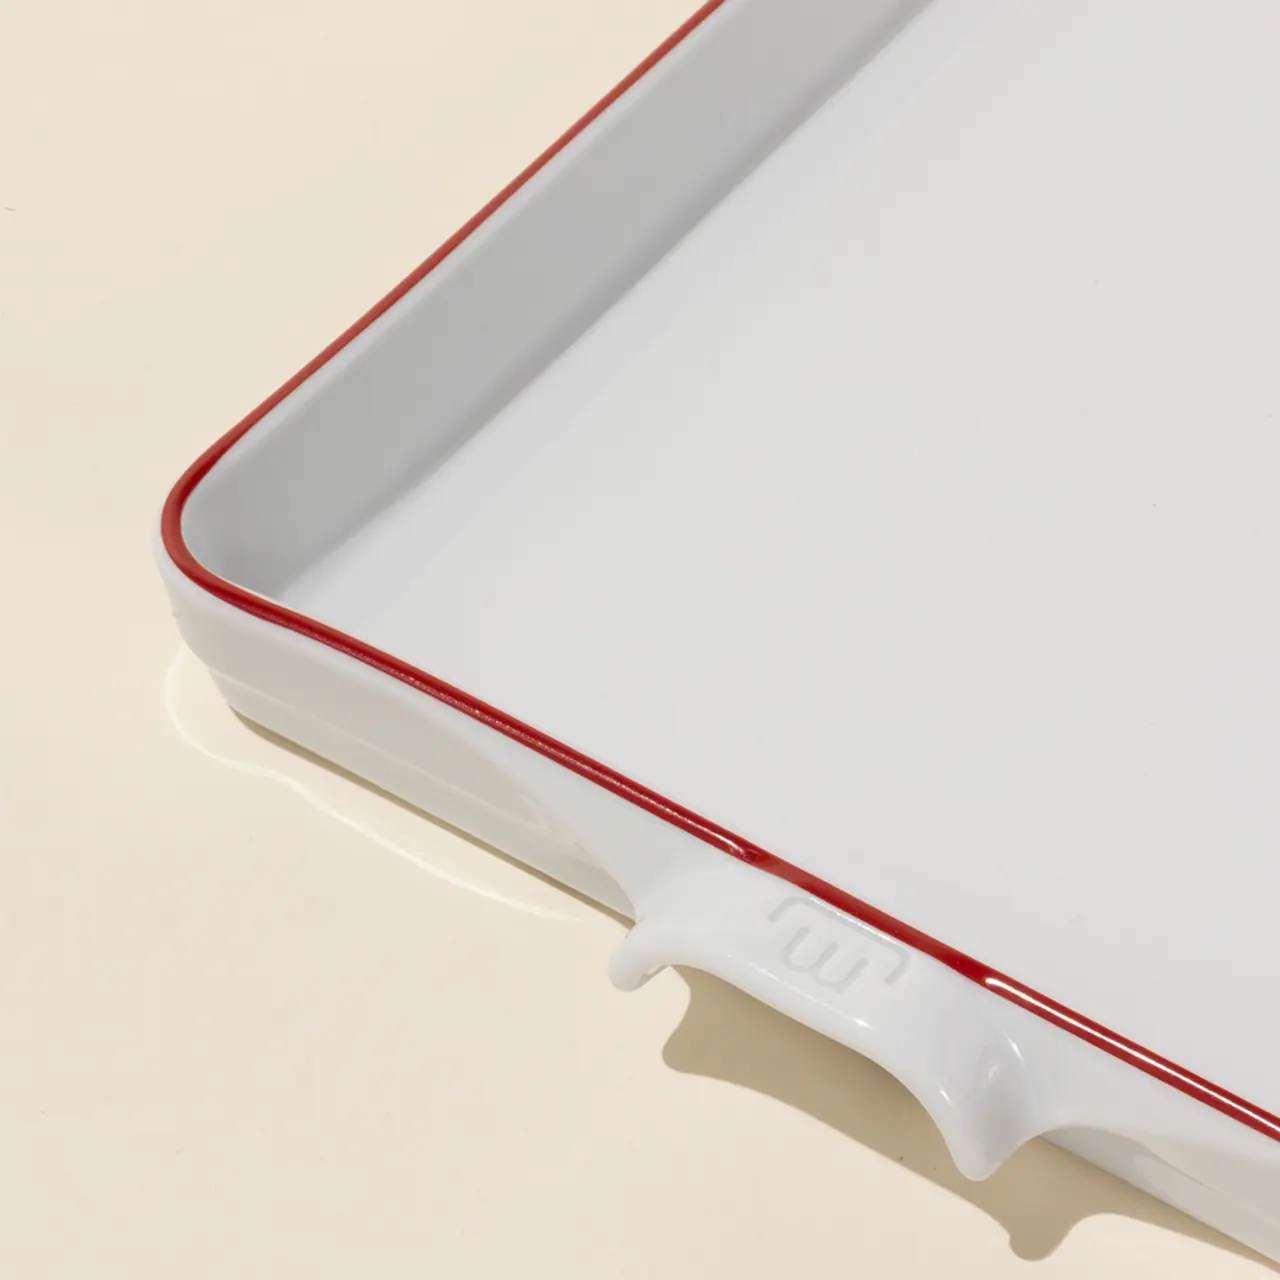 A white ceramic baking dish with red trim rests on a beige surface, angled to show the brand imprint on one handle.